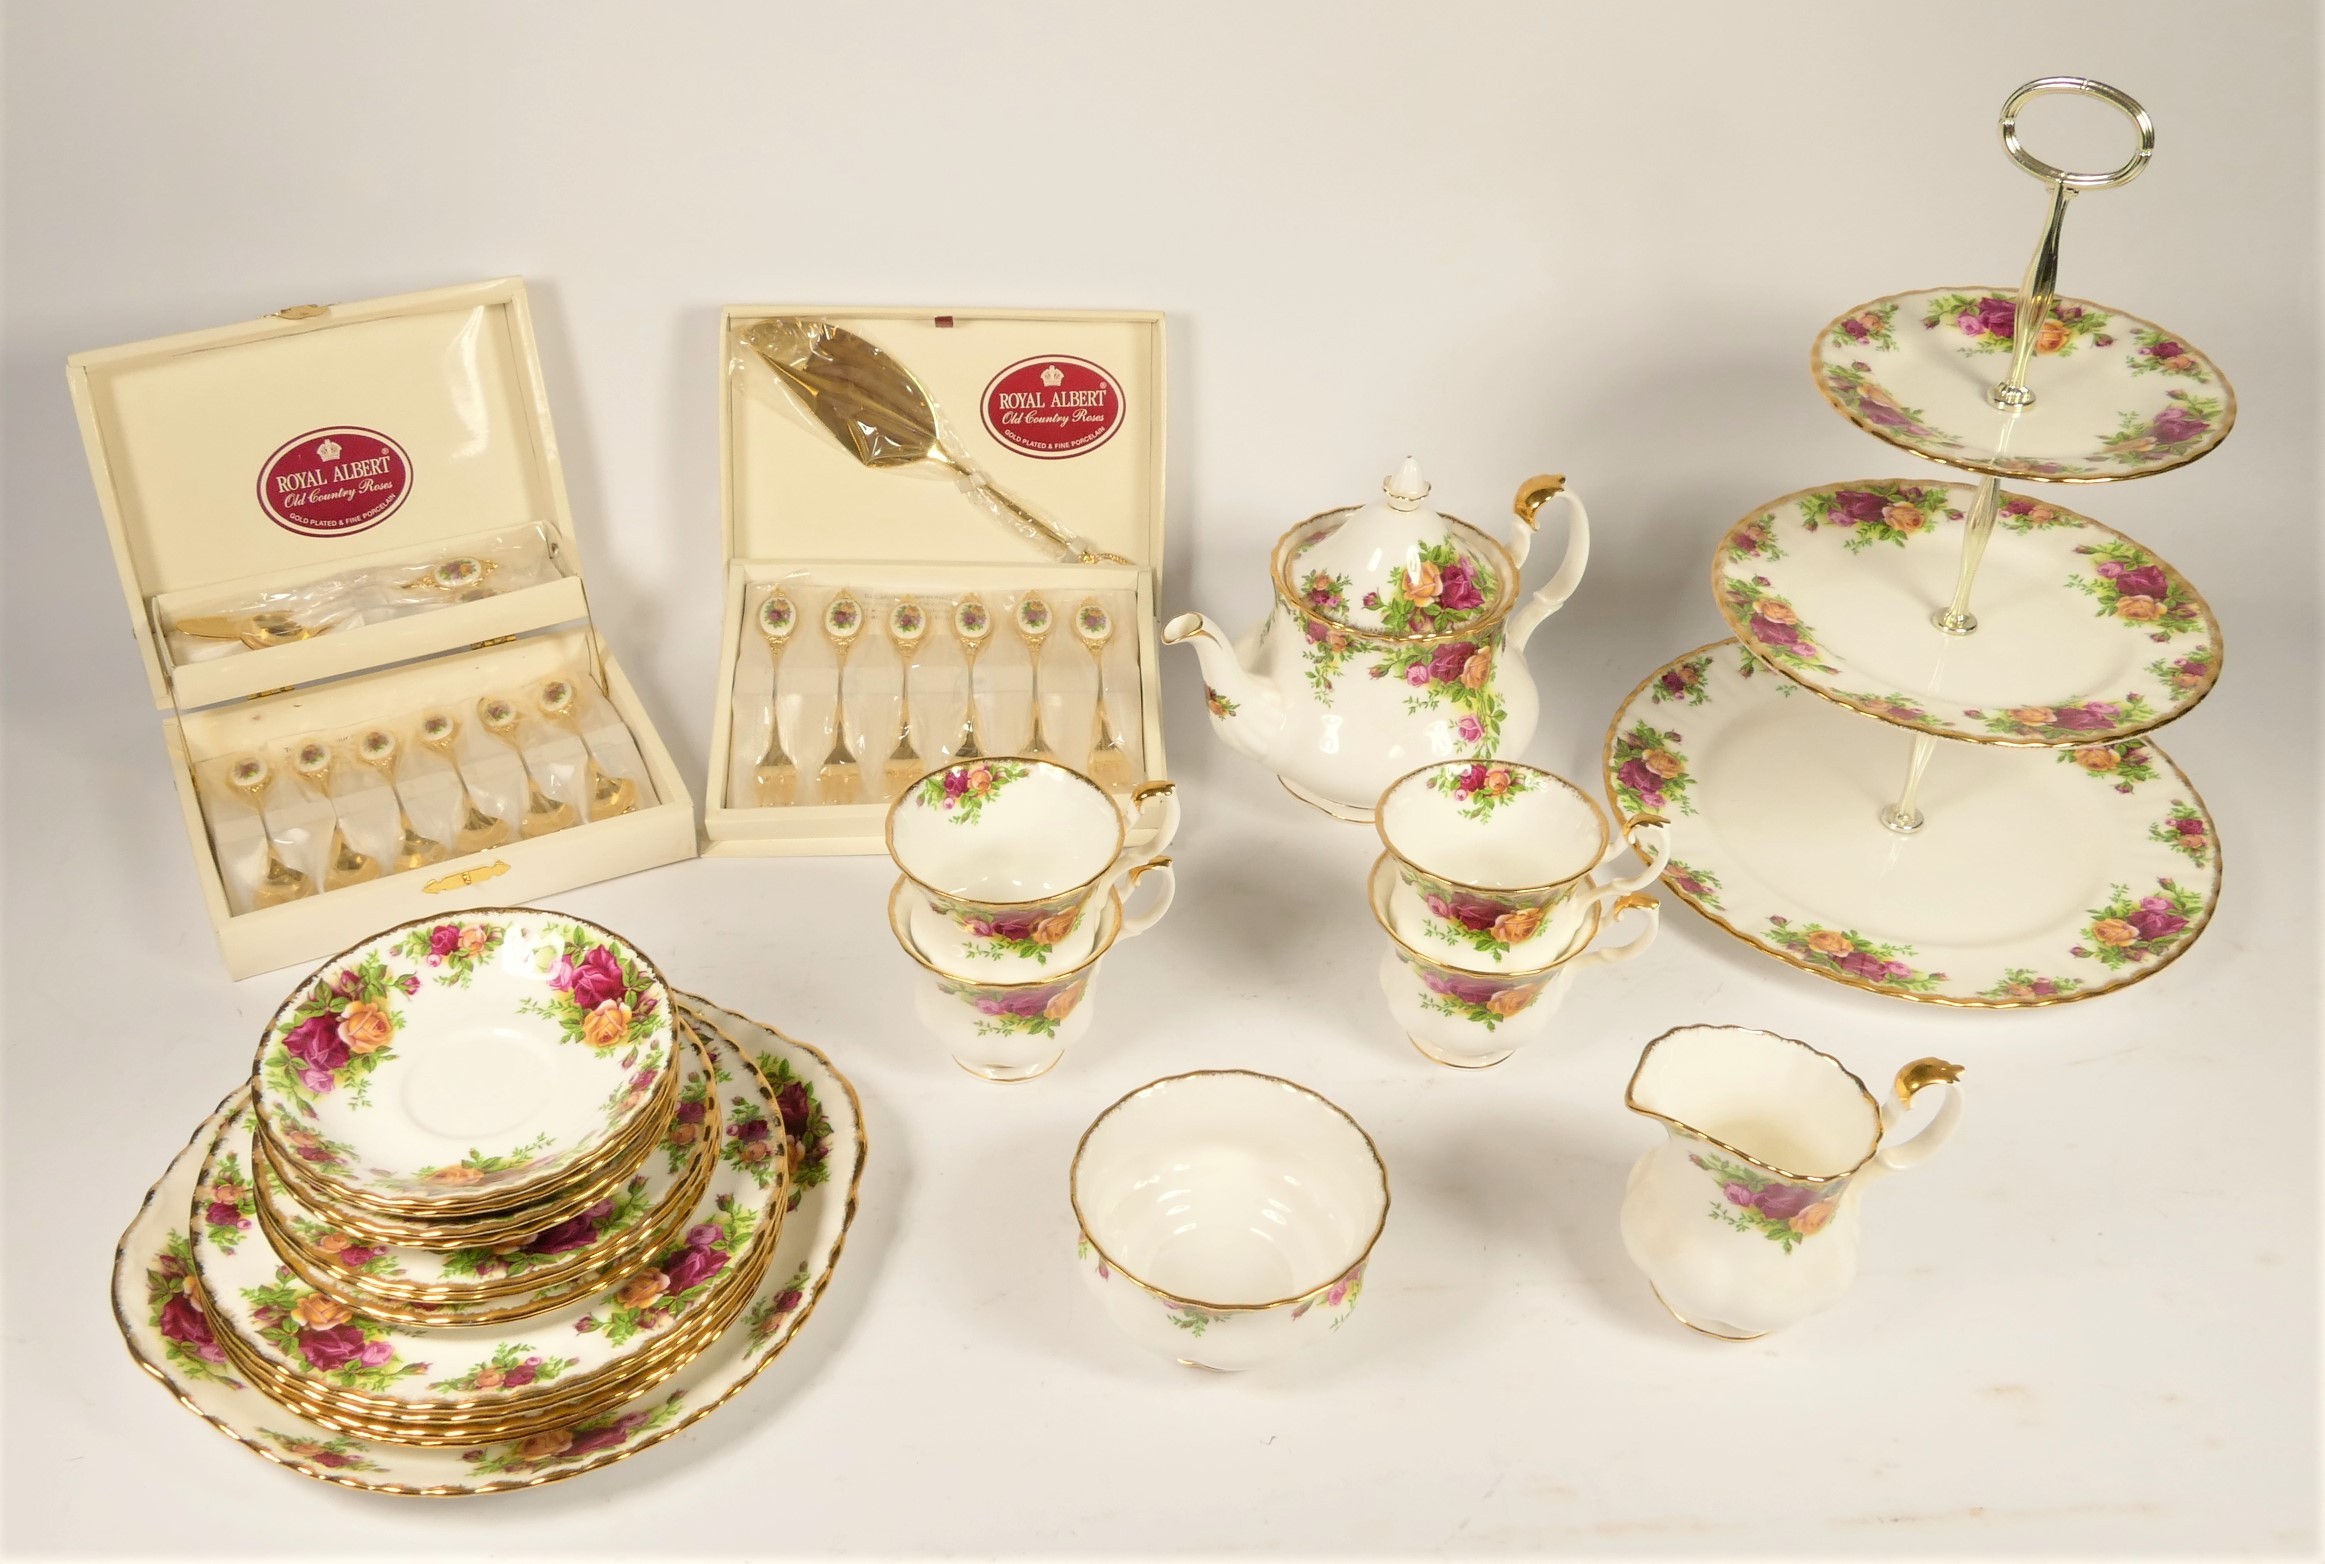 A collection of Royal Albert 'Country Roses' tea & dinnerware, twenty one pieces to include - 4